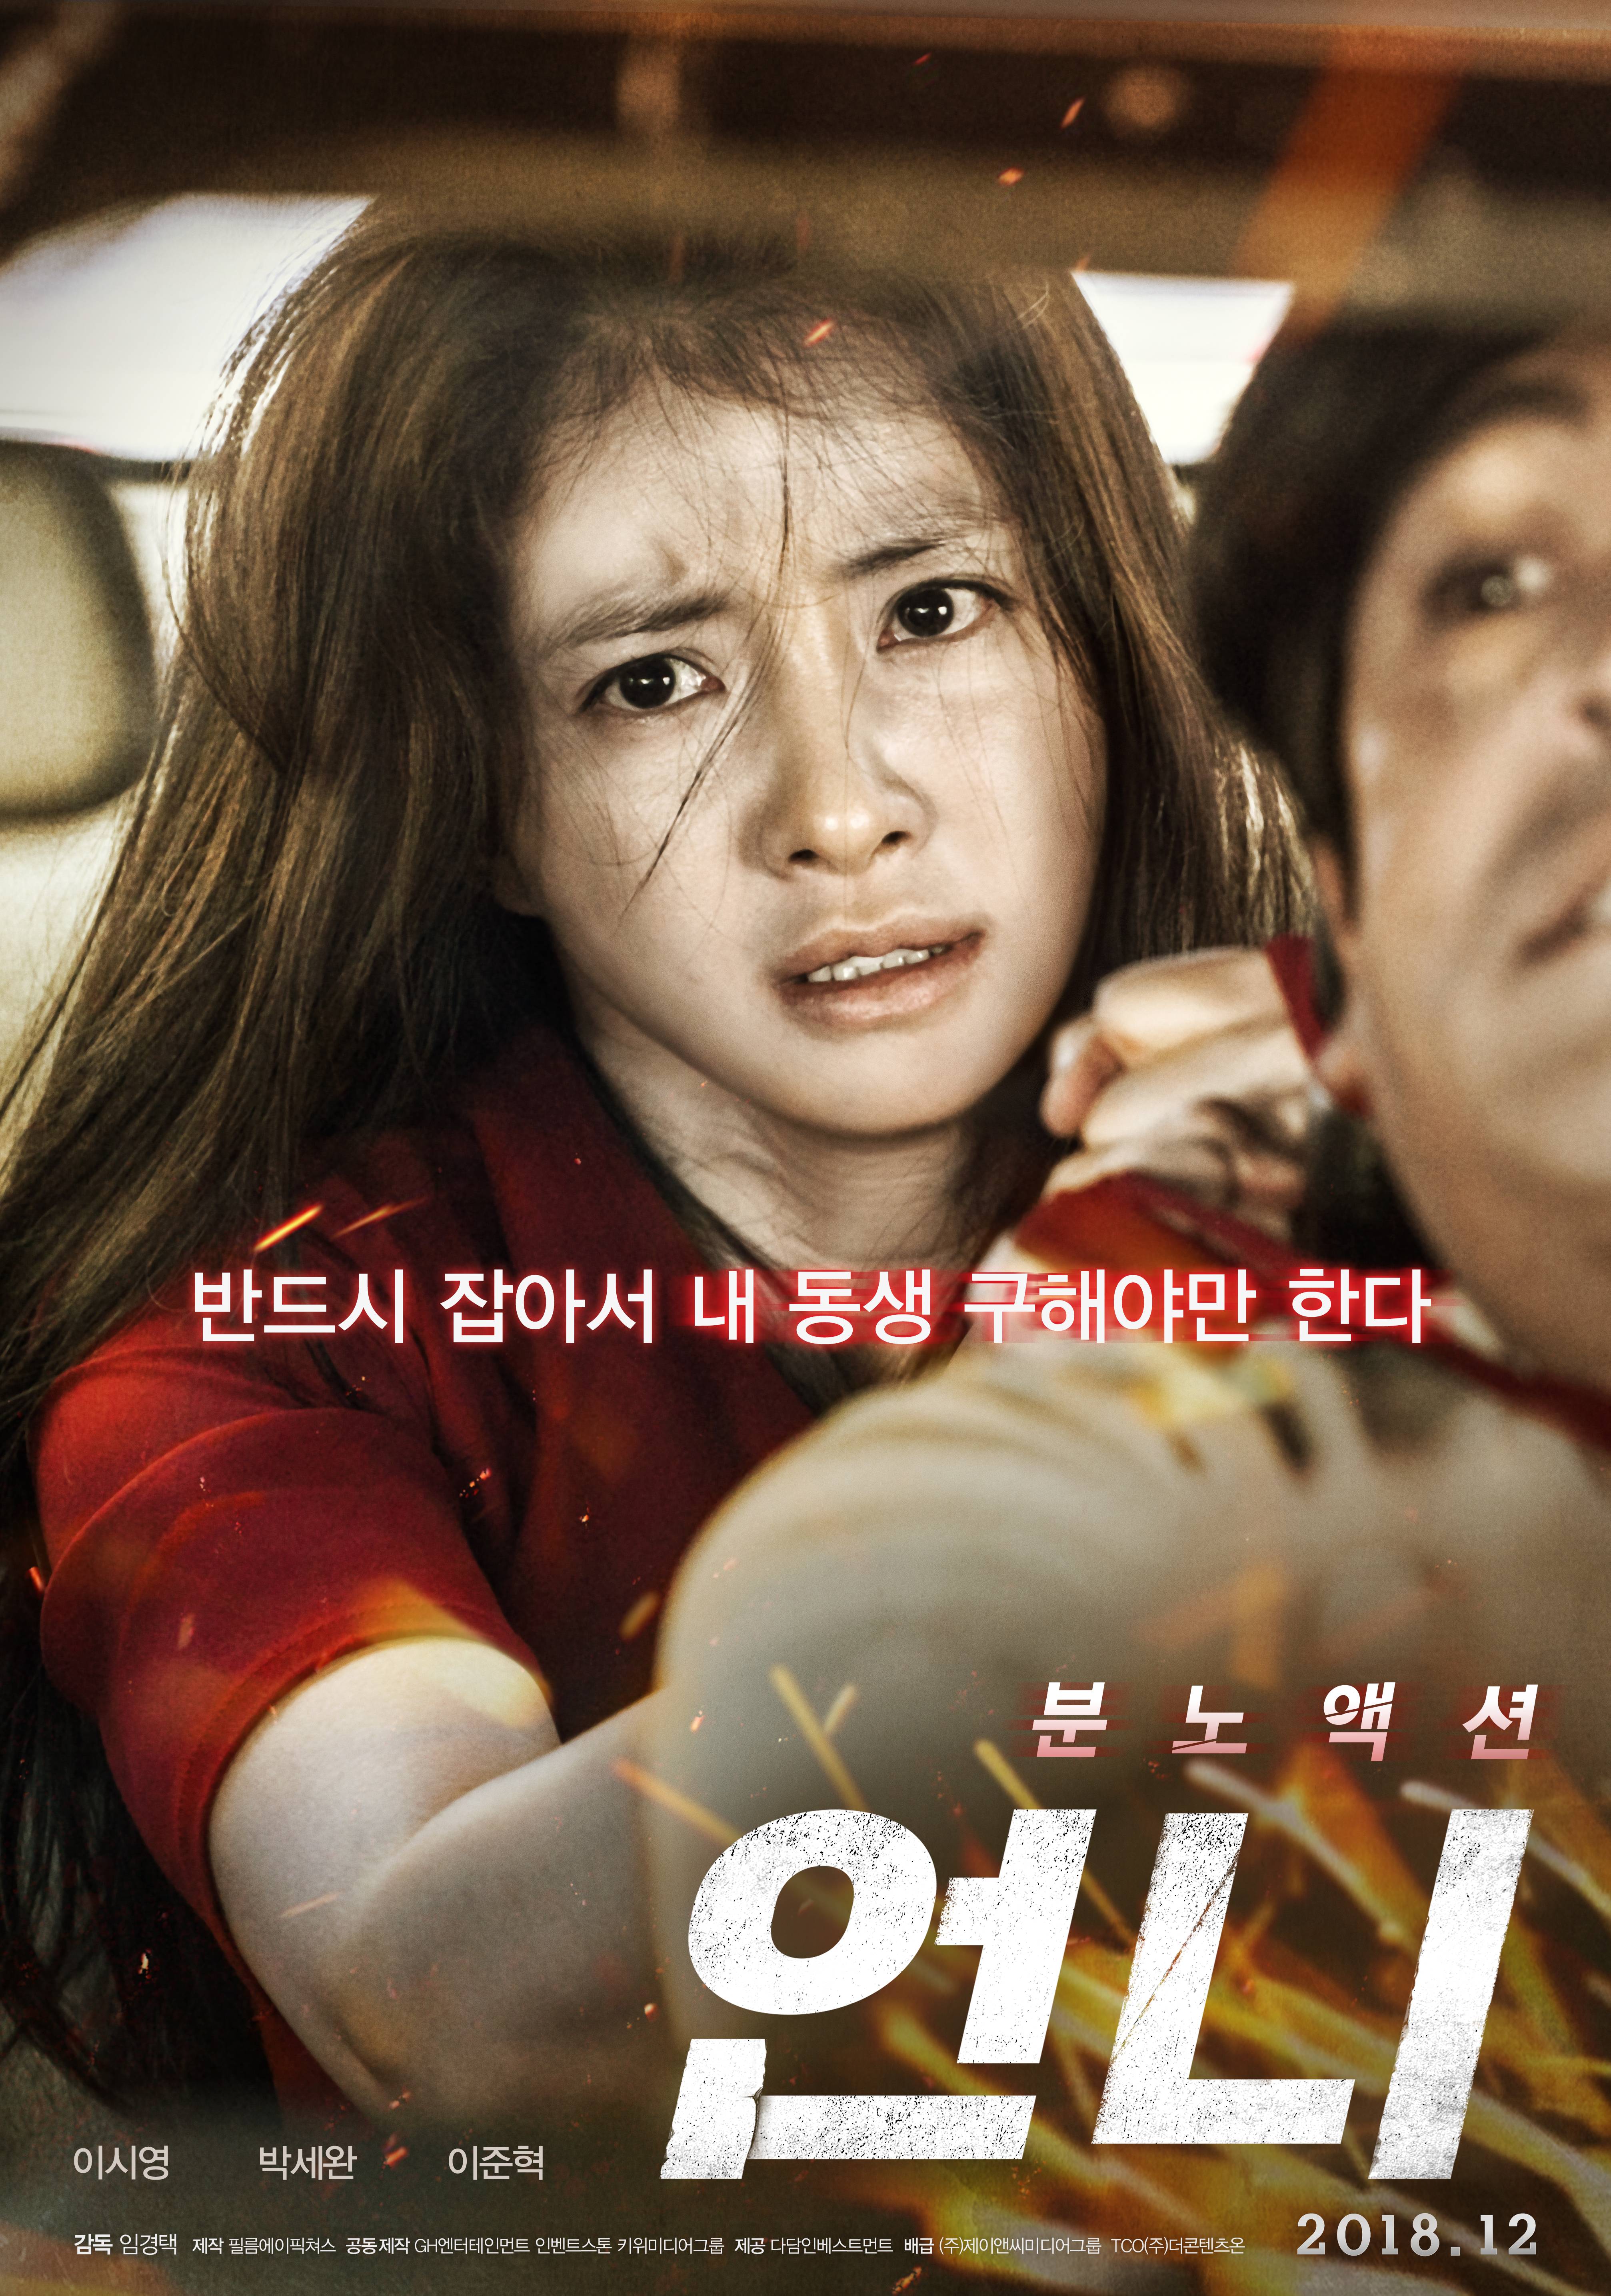 Photo] Lee Si-young Is Riveting in Newest Poster for 'No Mercy